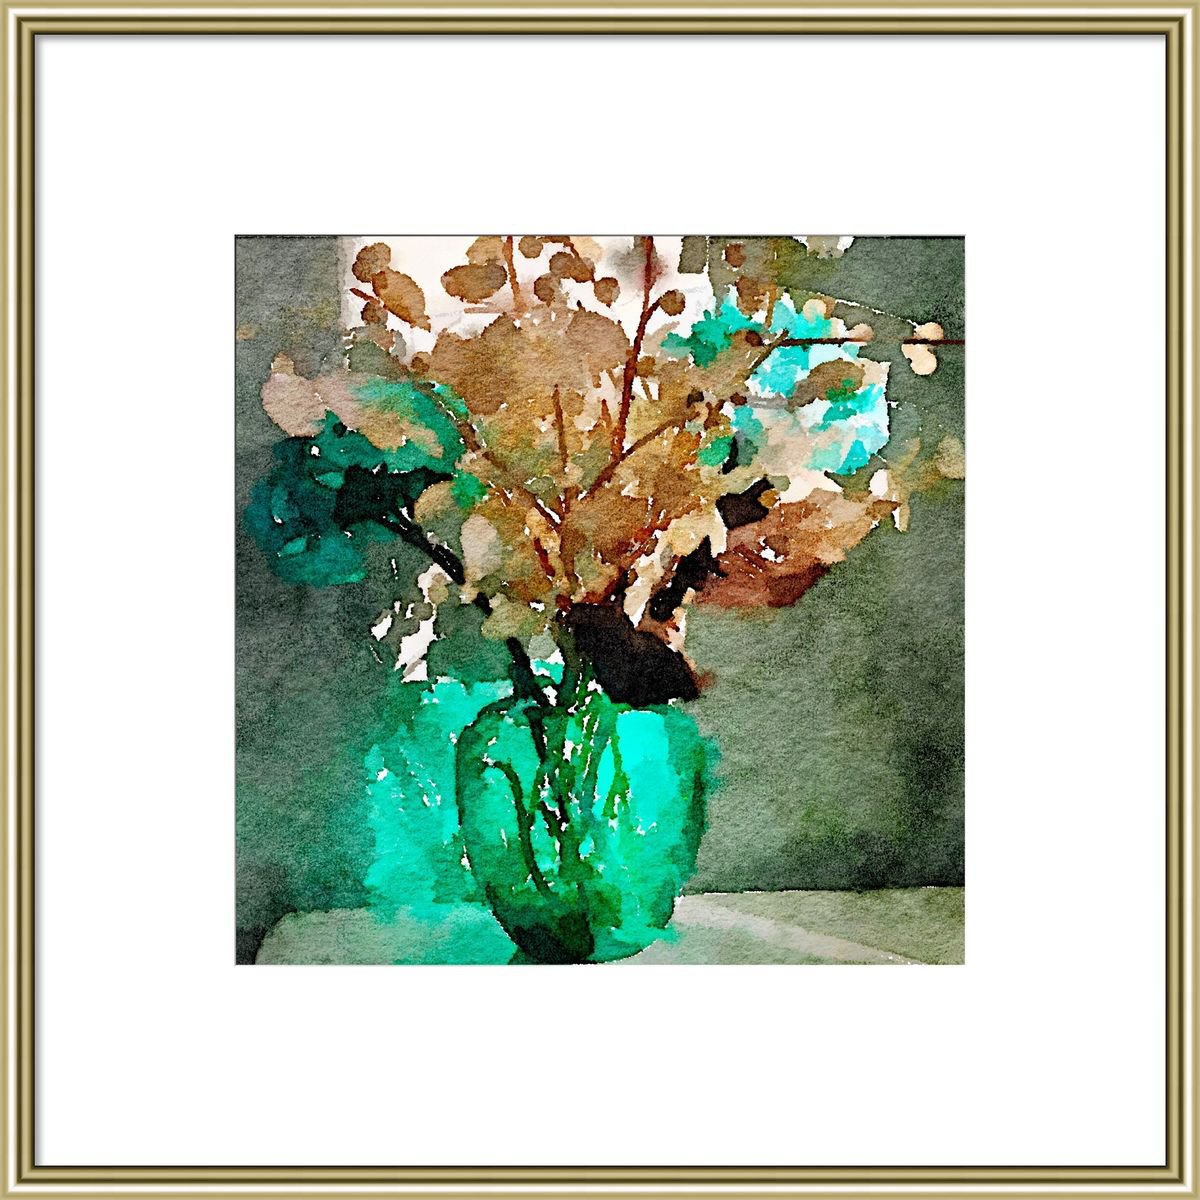 Turquoise vase by Shabs  Beigh